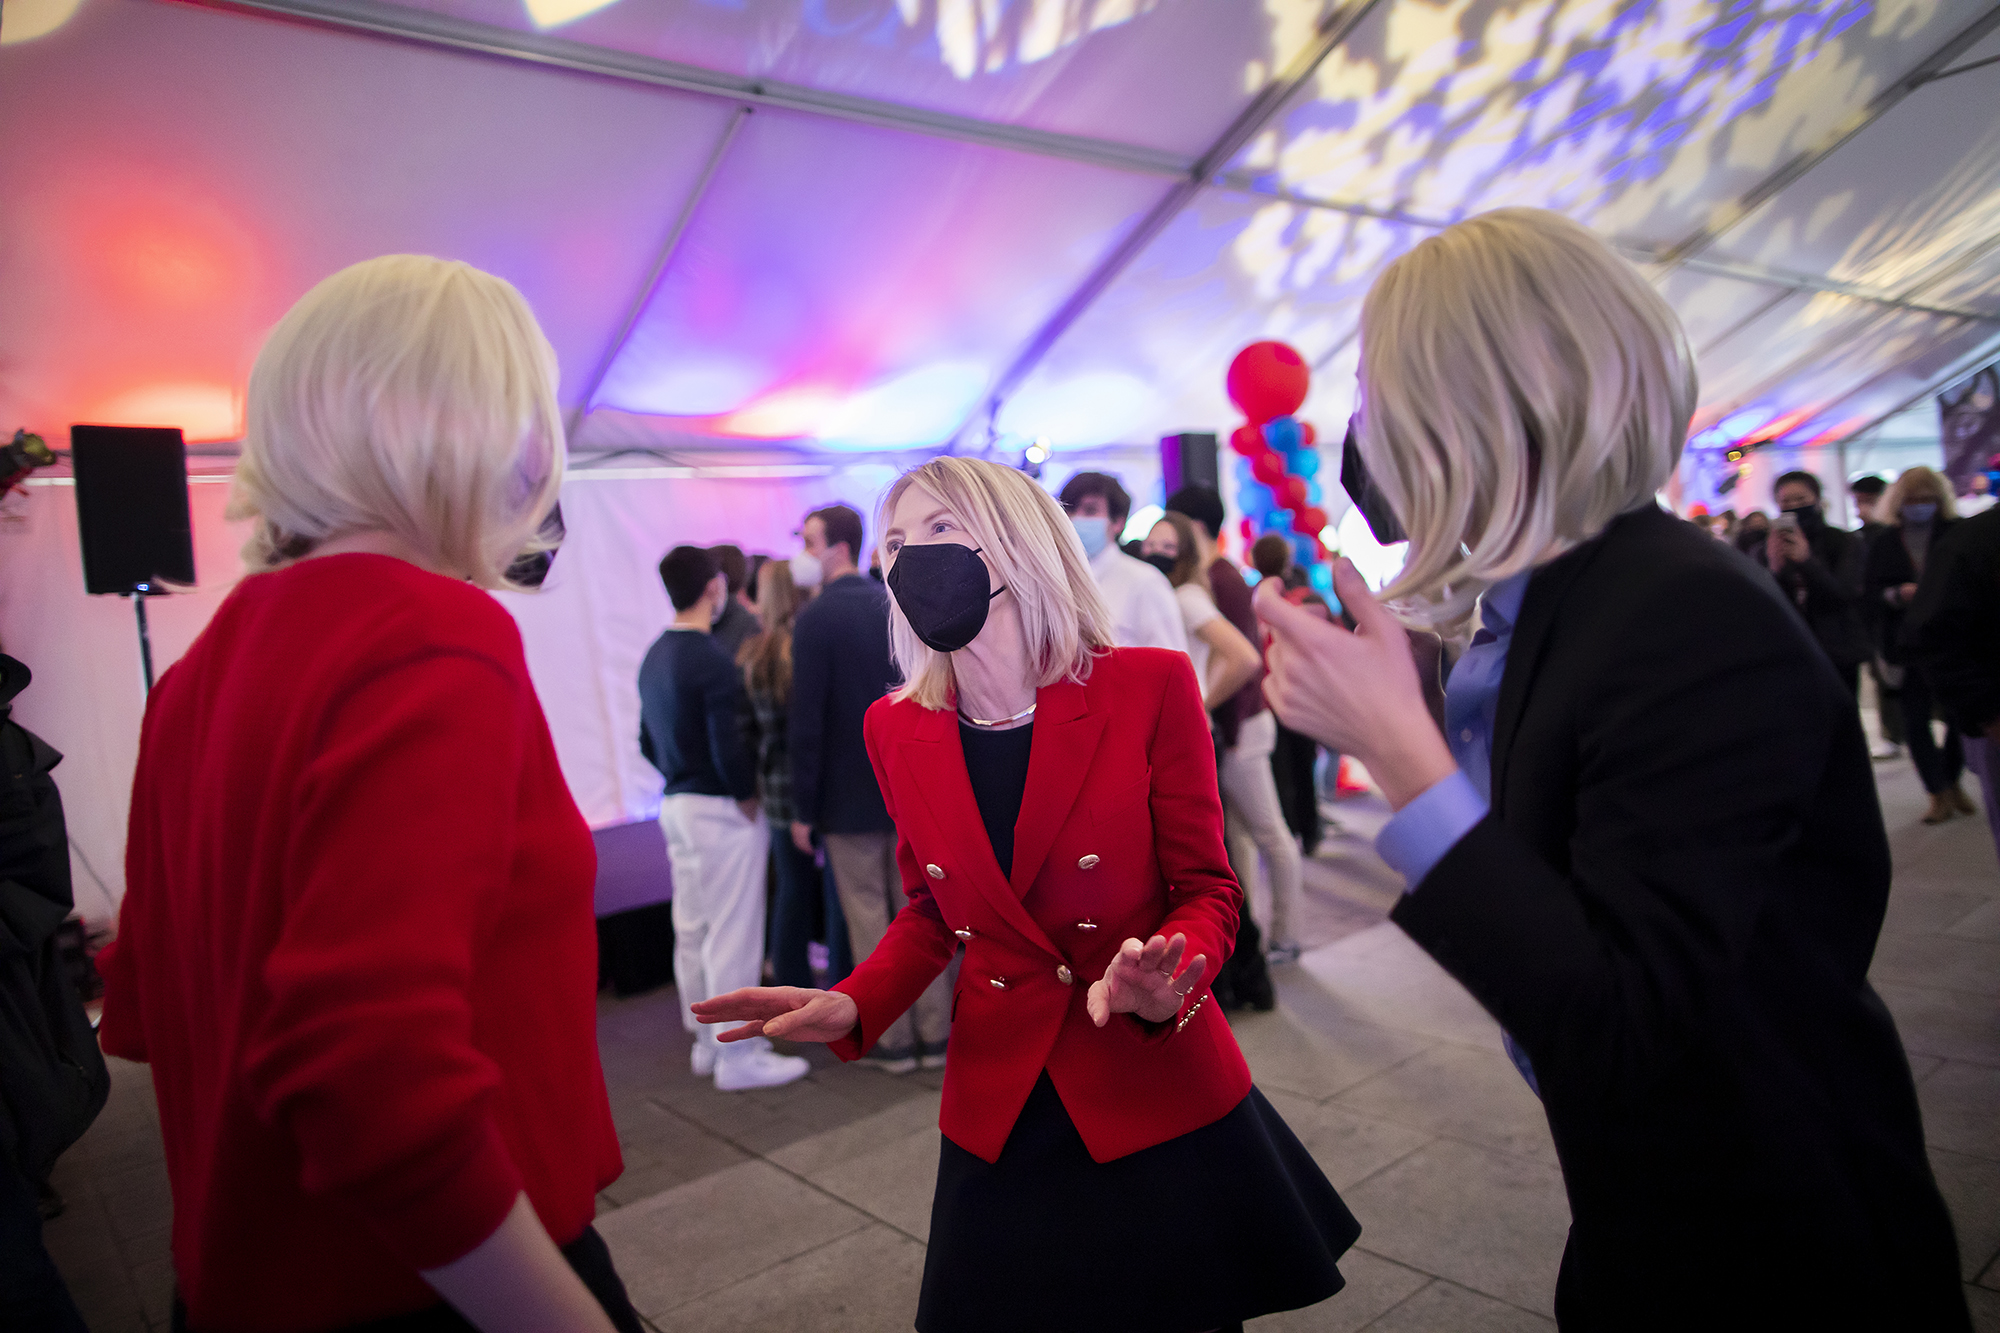 Penn President Amy Gutmann at a party talking with two students wearing blonde wigs.